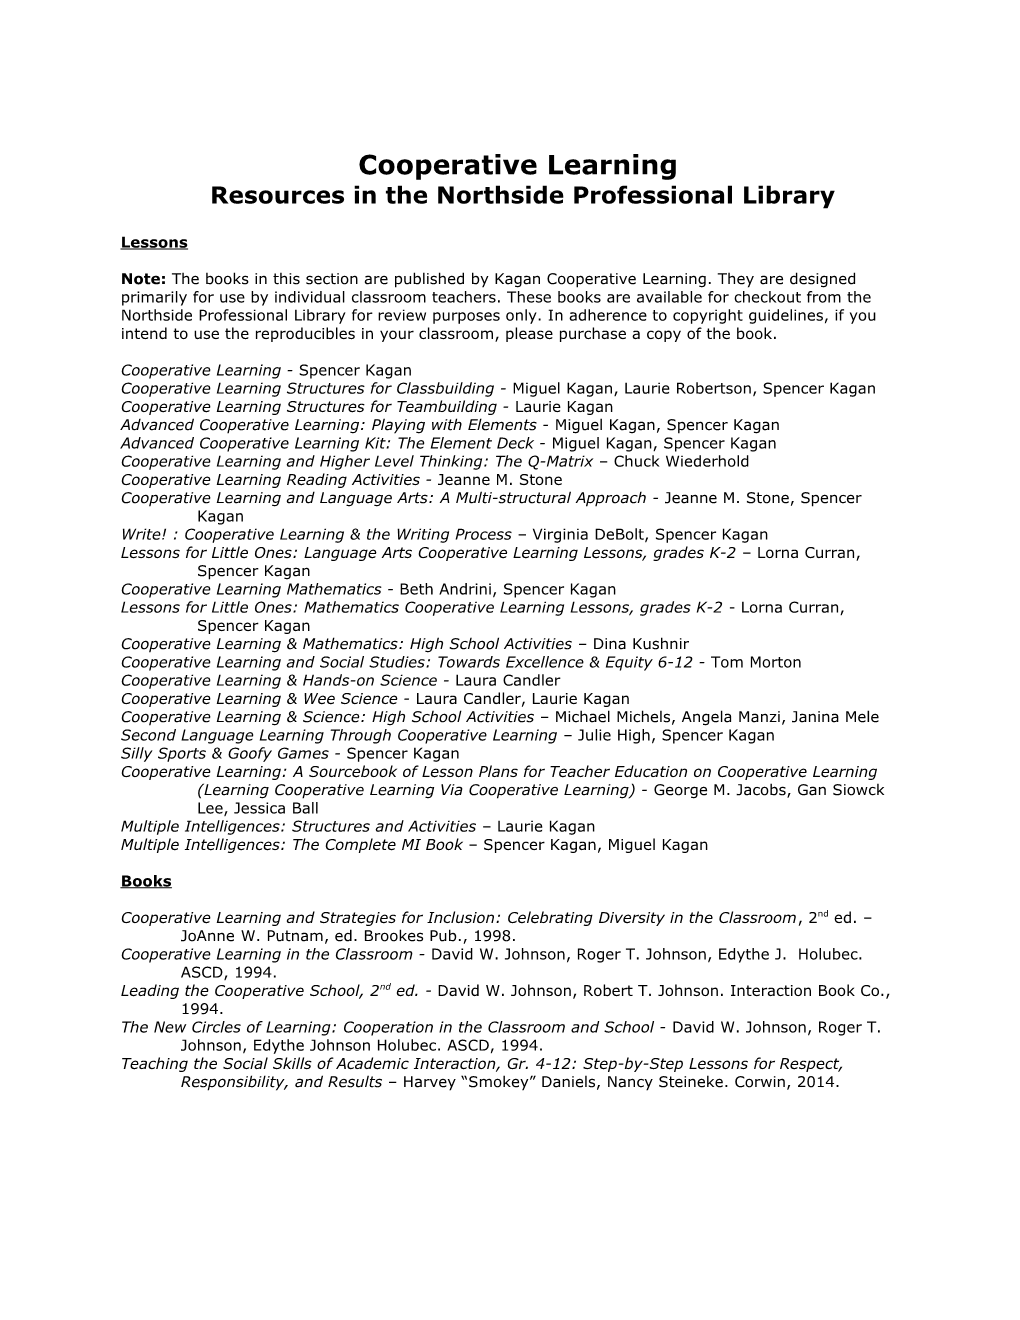 Northside Professional Library, Cooperative Learning1